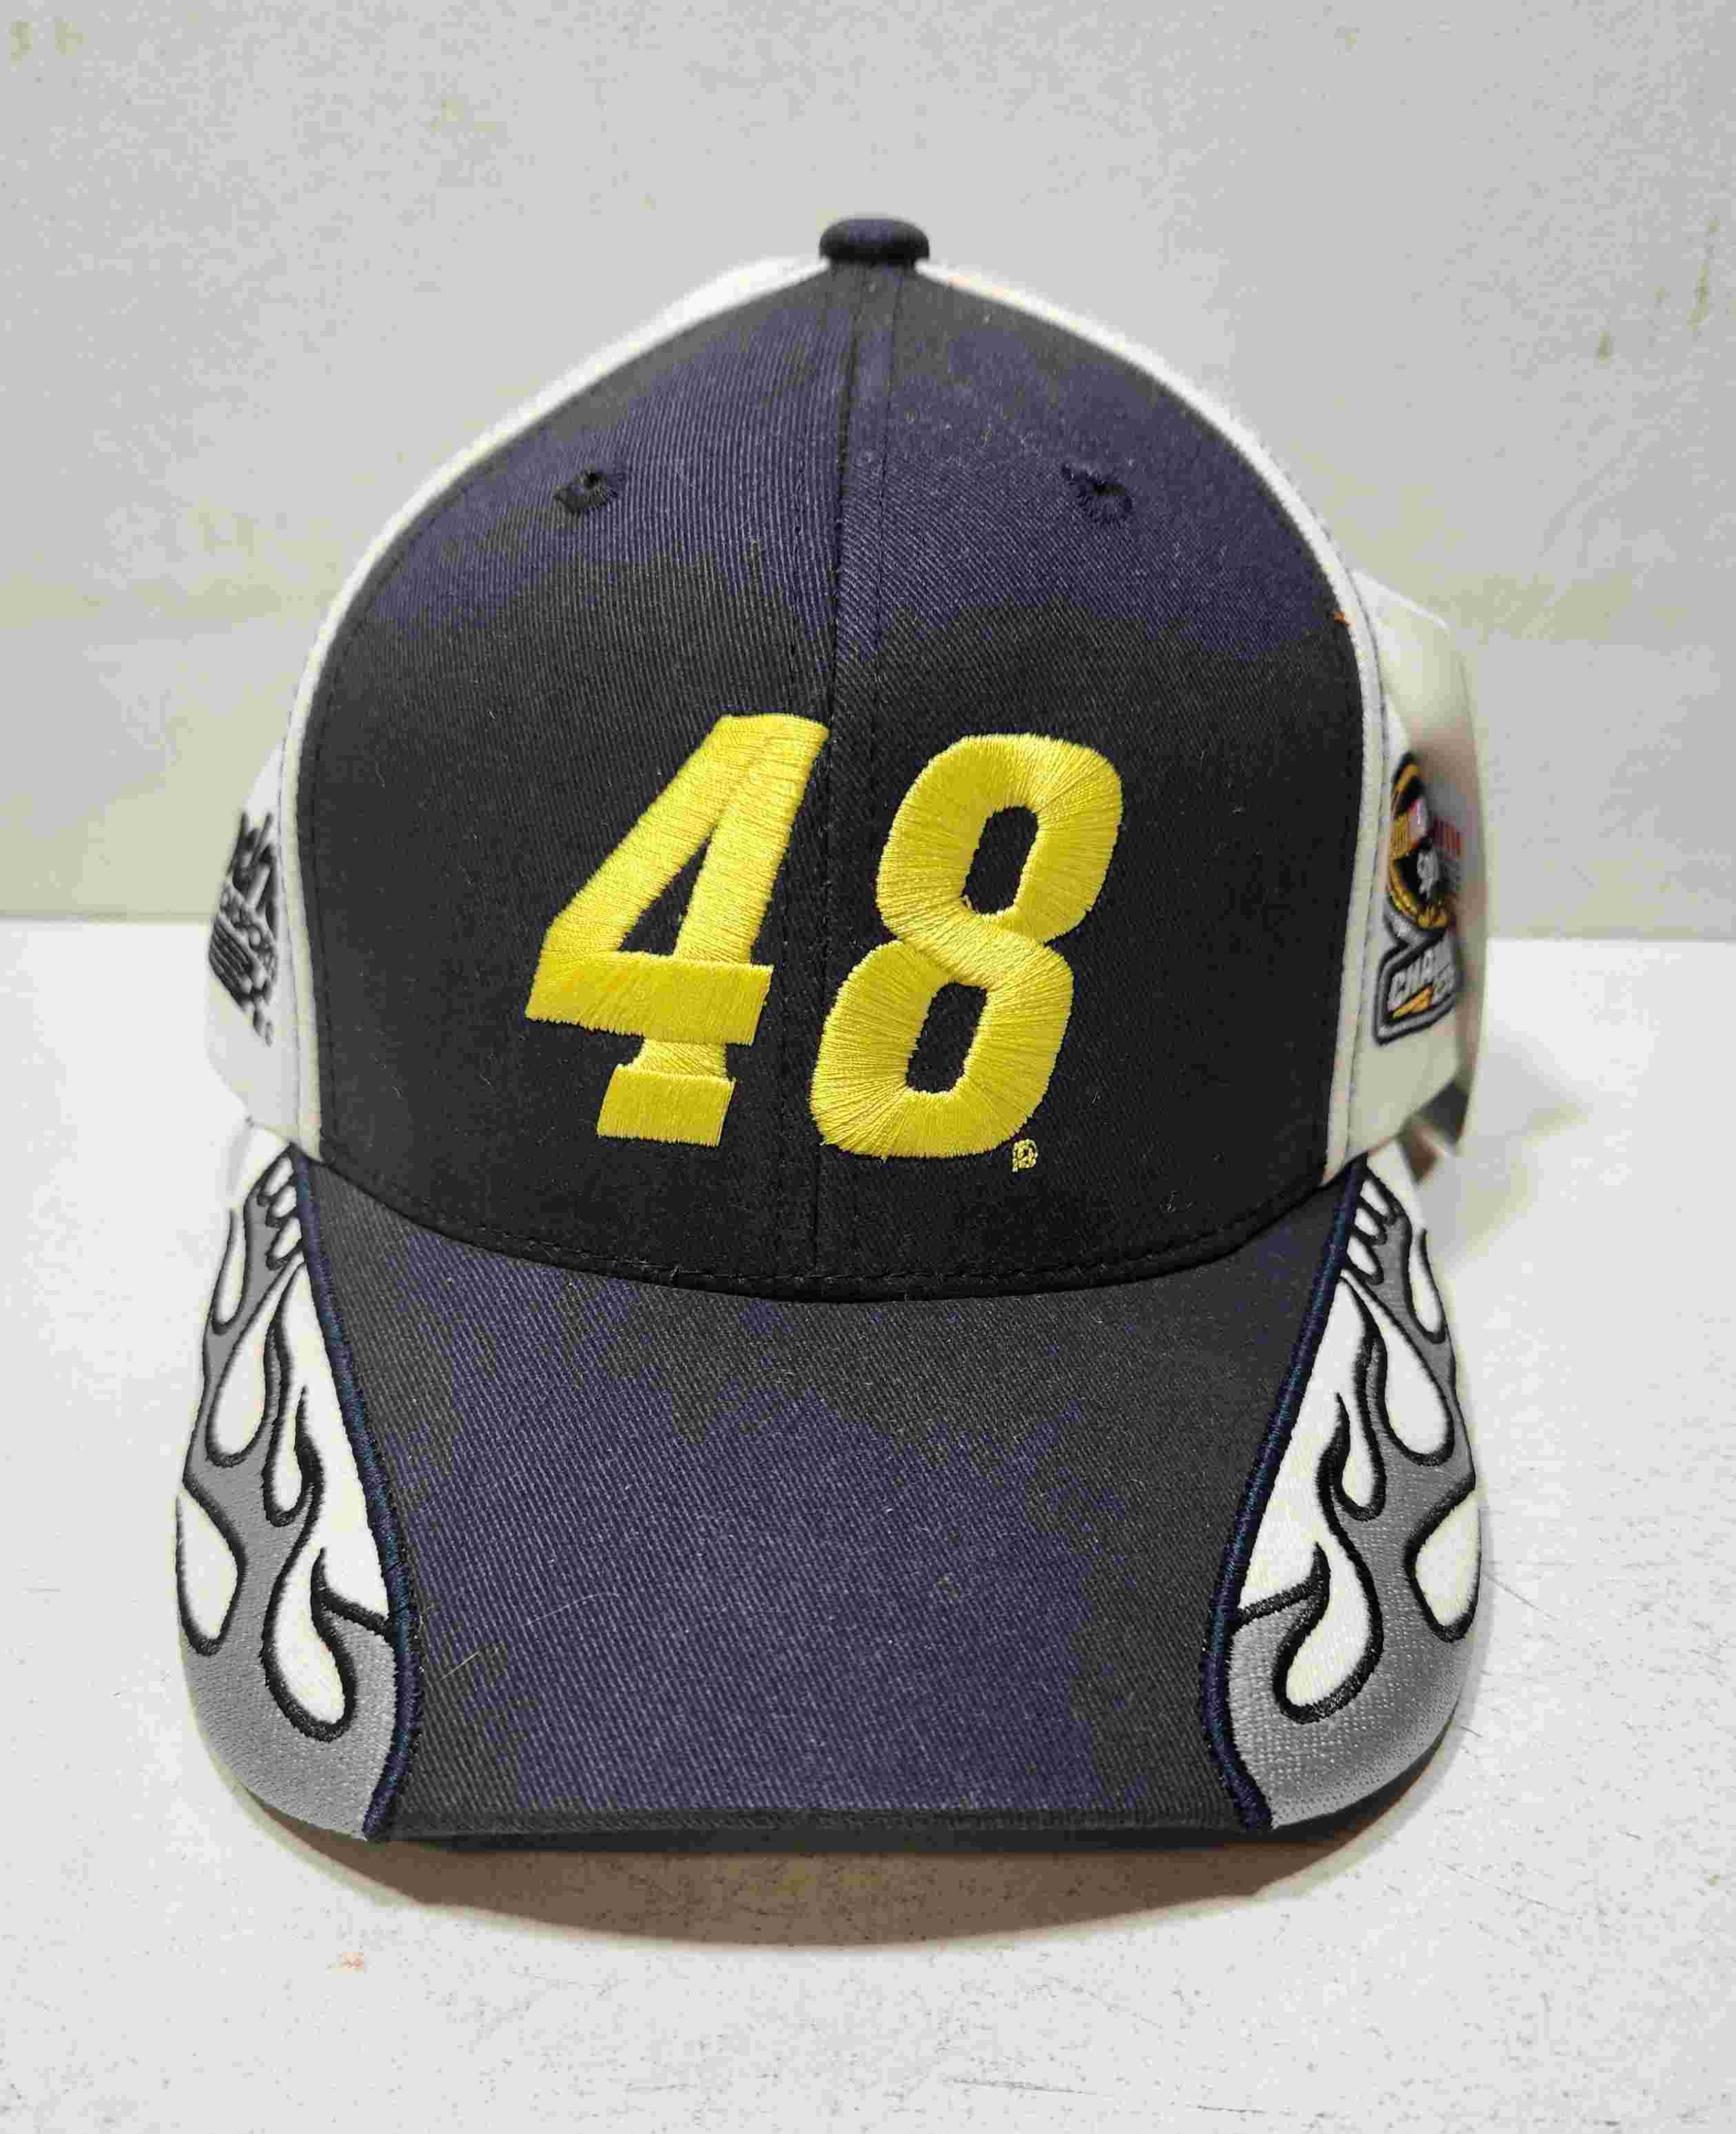 2016 Jimmie Johnson Lowe's "7-Time Champion" "Flame" cap